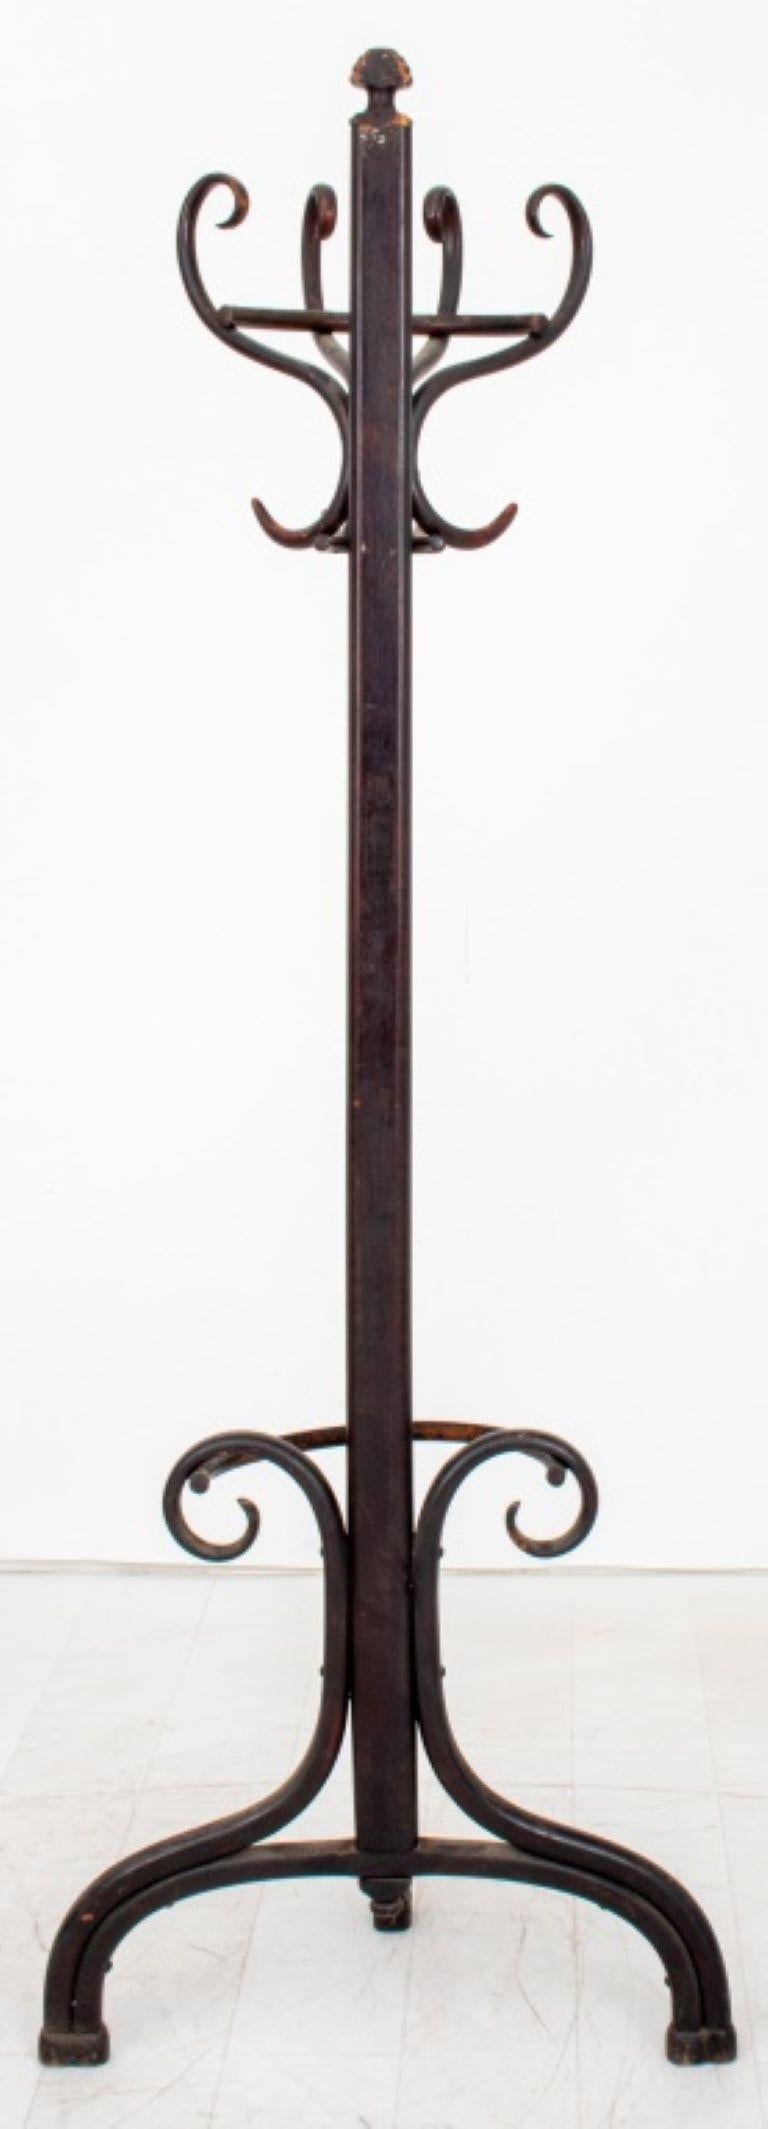 Thonet Bentwood Hall Coat Rack For Sale 3